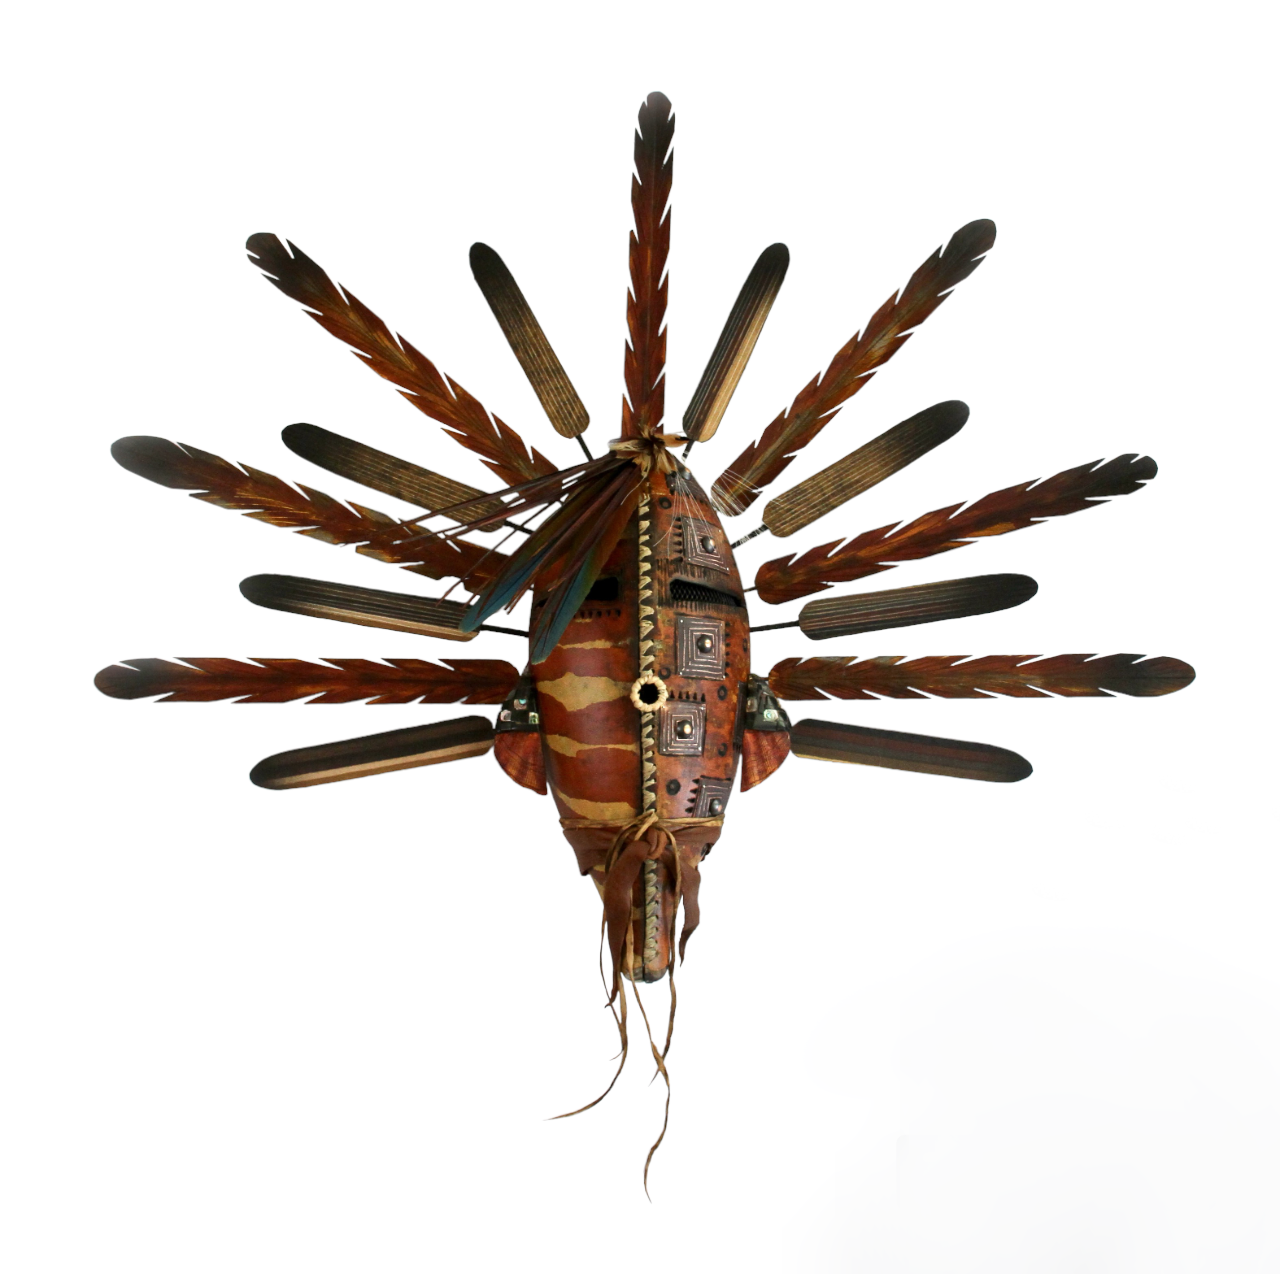 Contemporary Mask with Feathers-Sculpture-Robert Rivera-Sorrel Sky Gallery